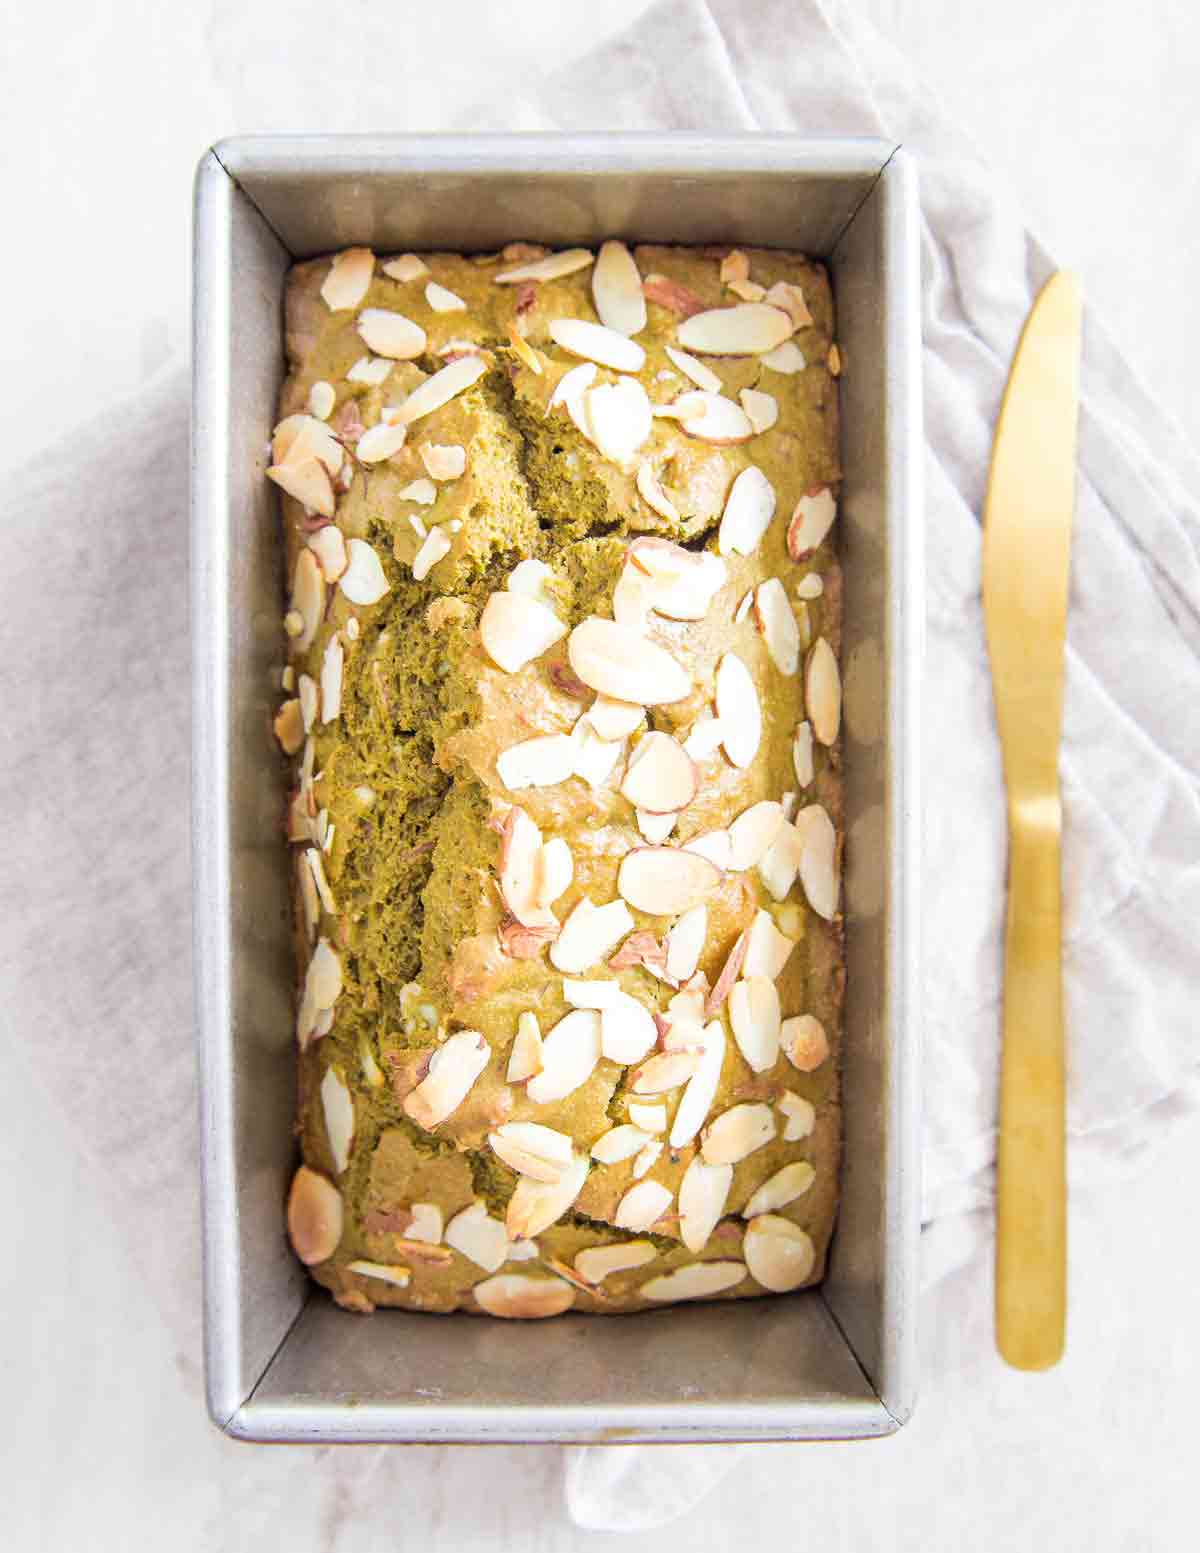 Matcha Bread with almonds is a delicious and easy quick bread recipe perfect for snacking, breakfast or dessert.